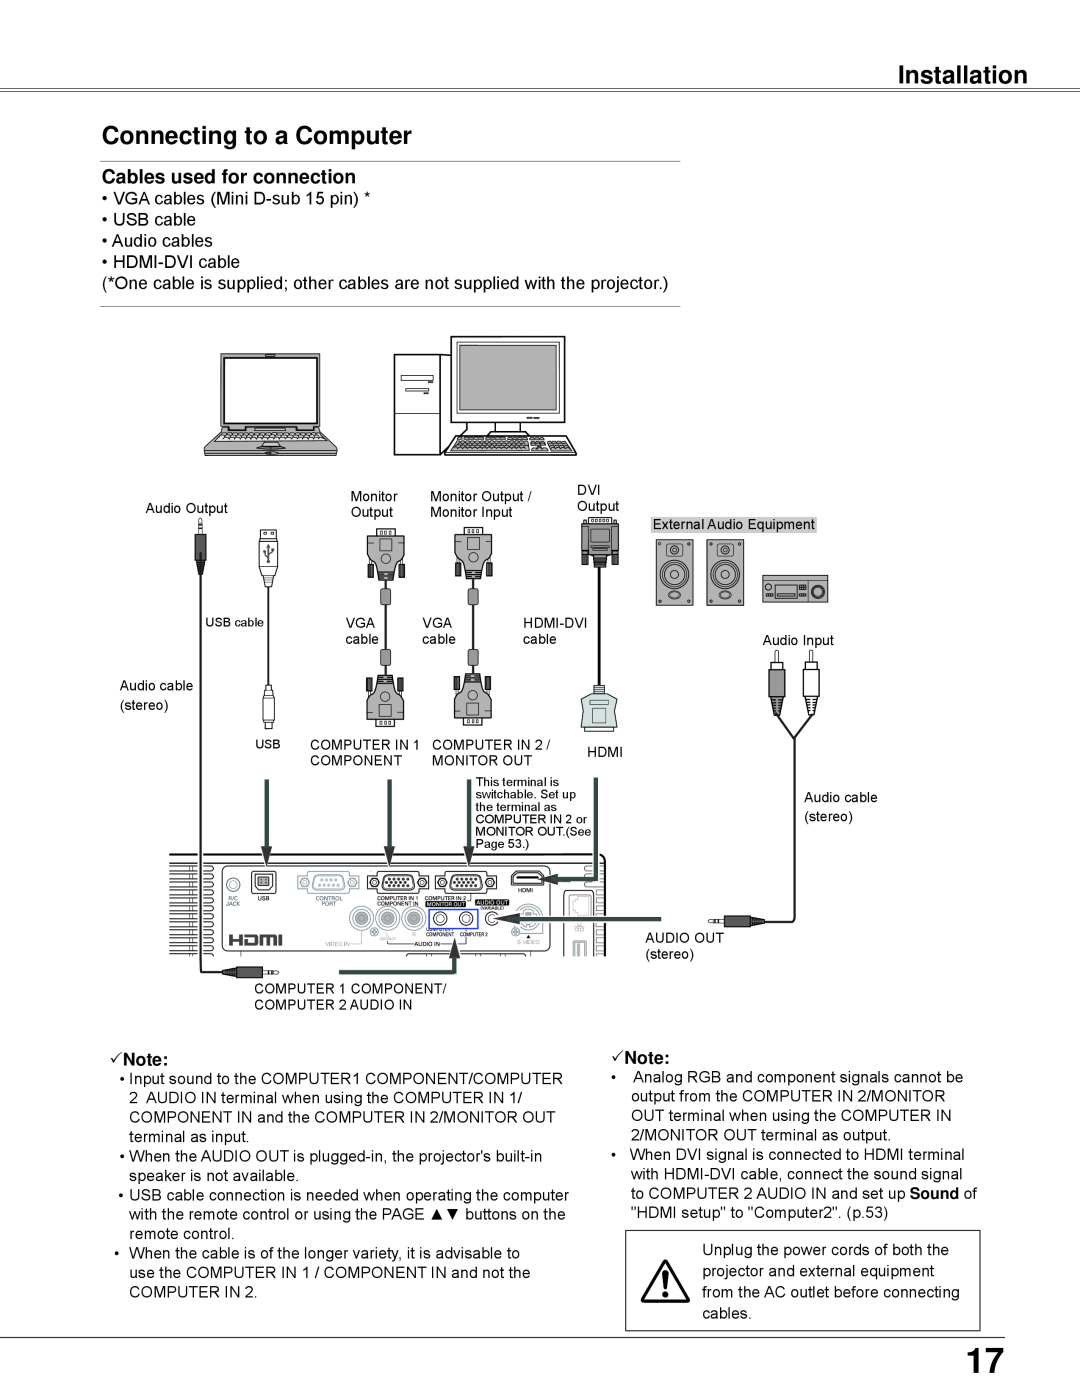 Eiki LC-WB42N owner manual Installation Connecting to a Computer, Cables used for connection, Note 